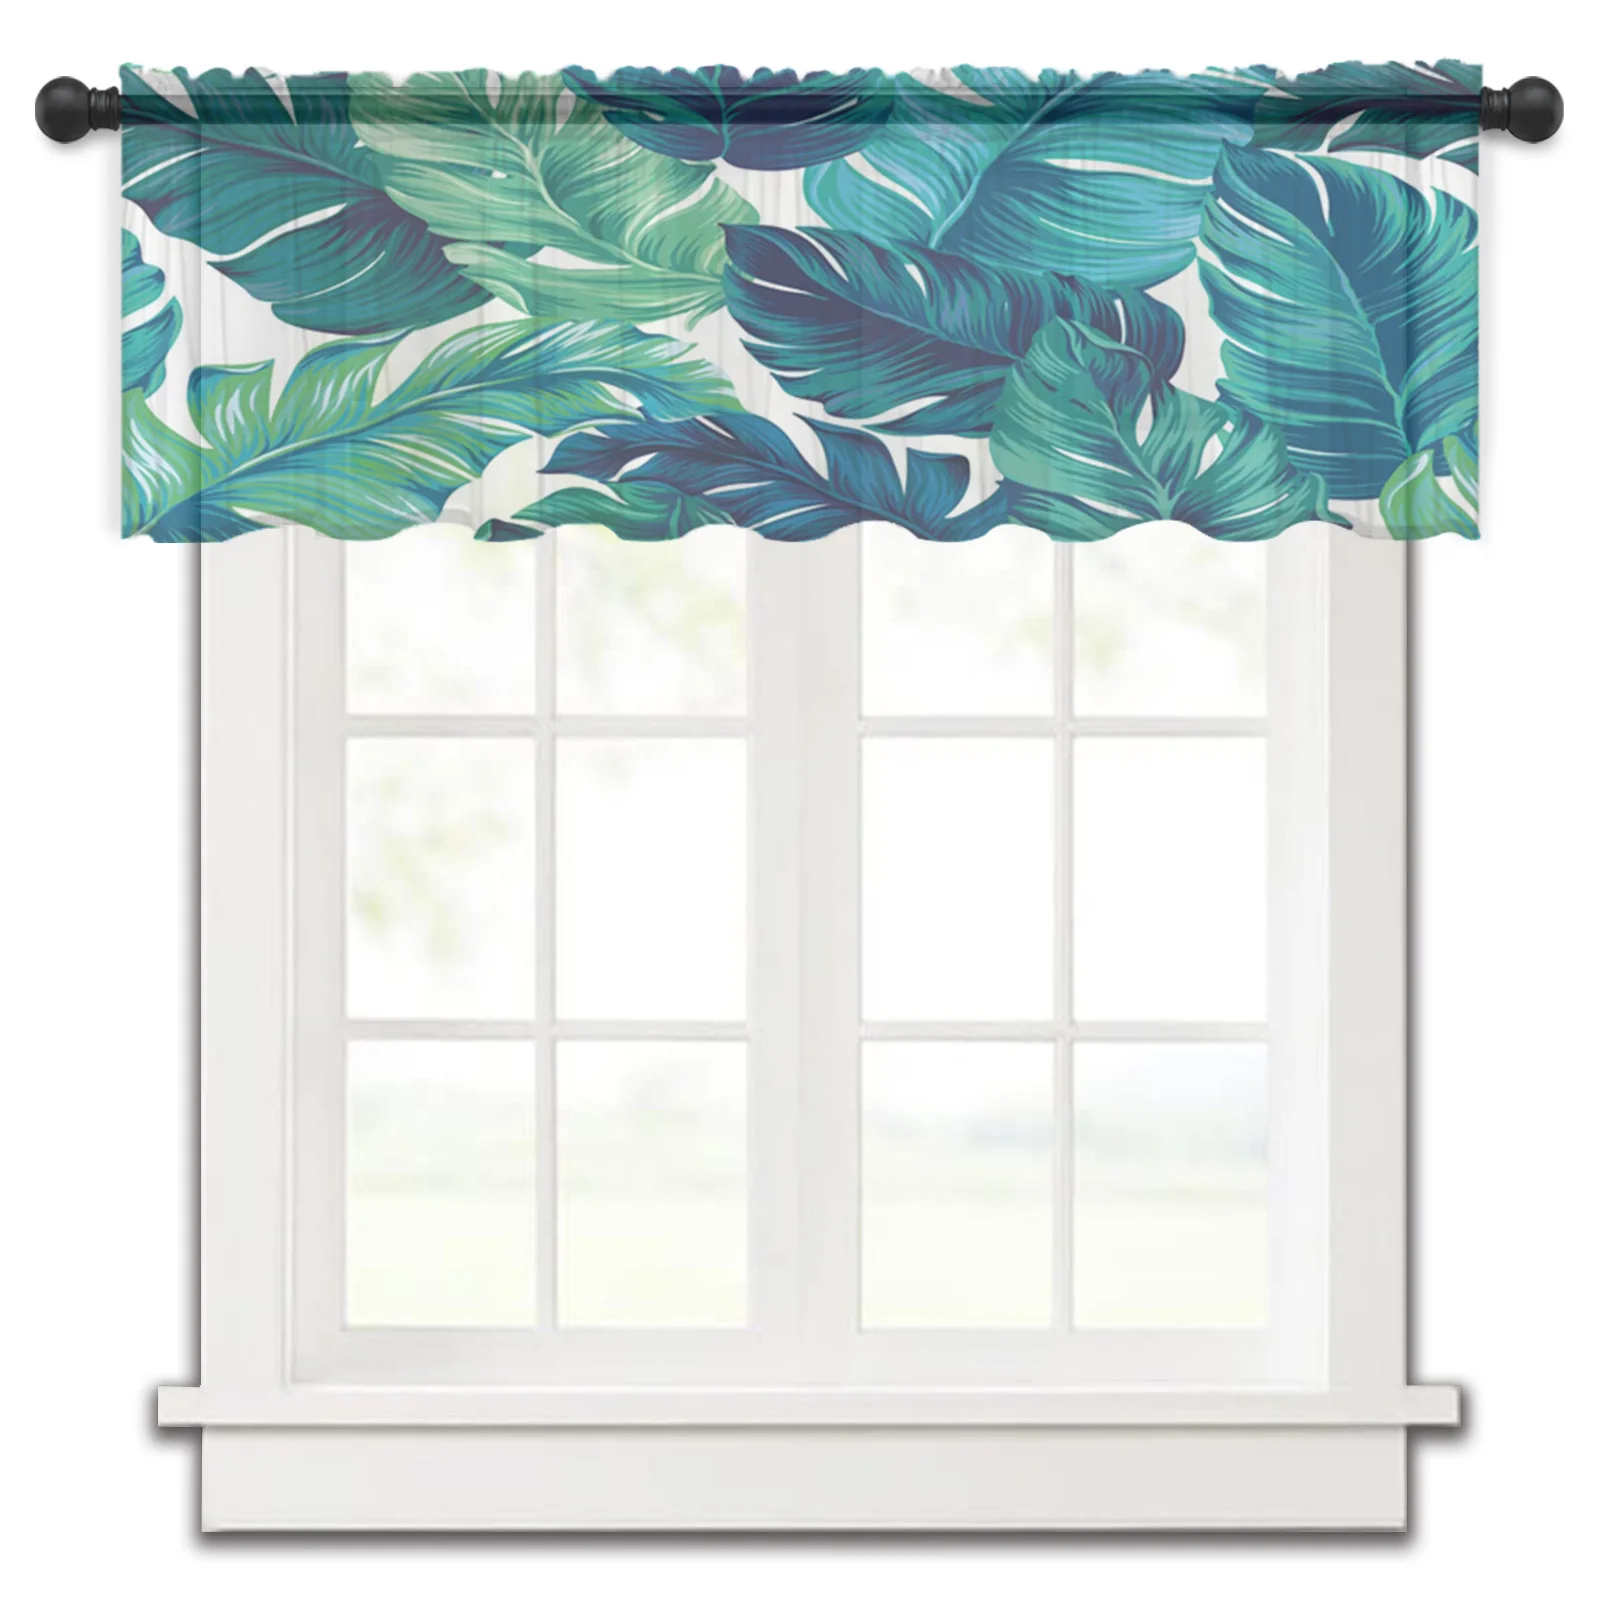 

Leaves Tropical Turquoise Kitchen Small Window Curtain Tulle Sheer Short Curtain Bedroom Living Room Home Decor Voile Drapes